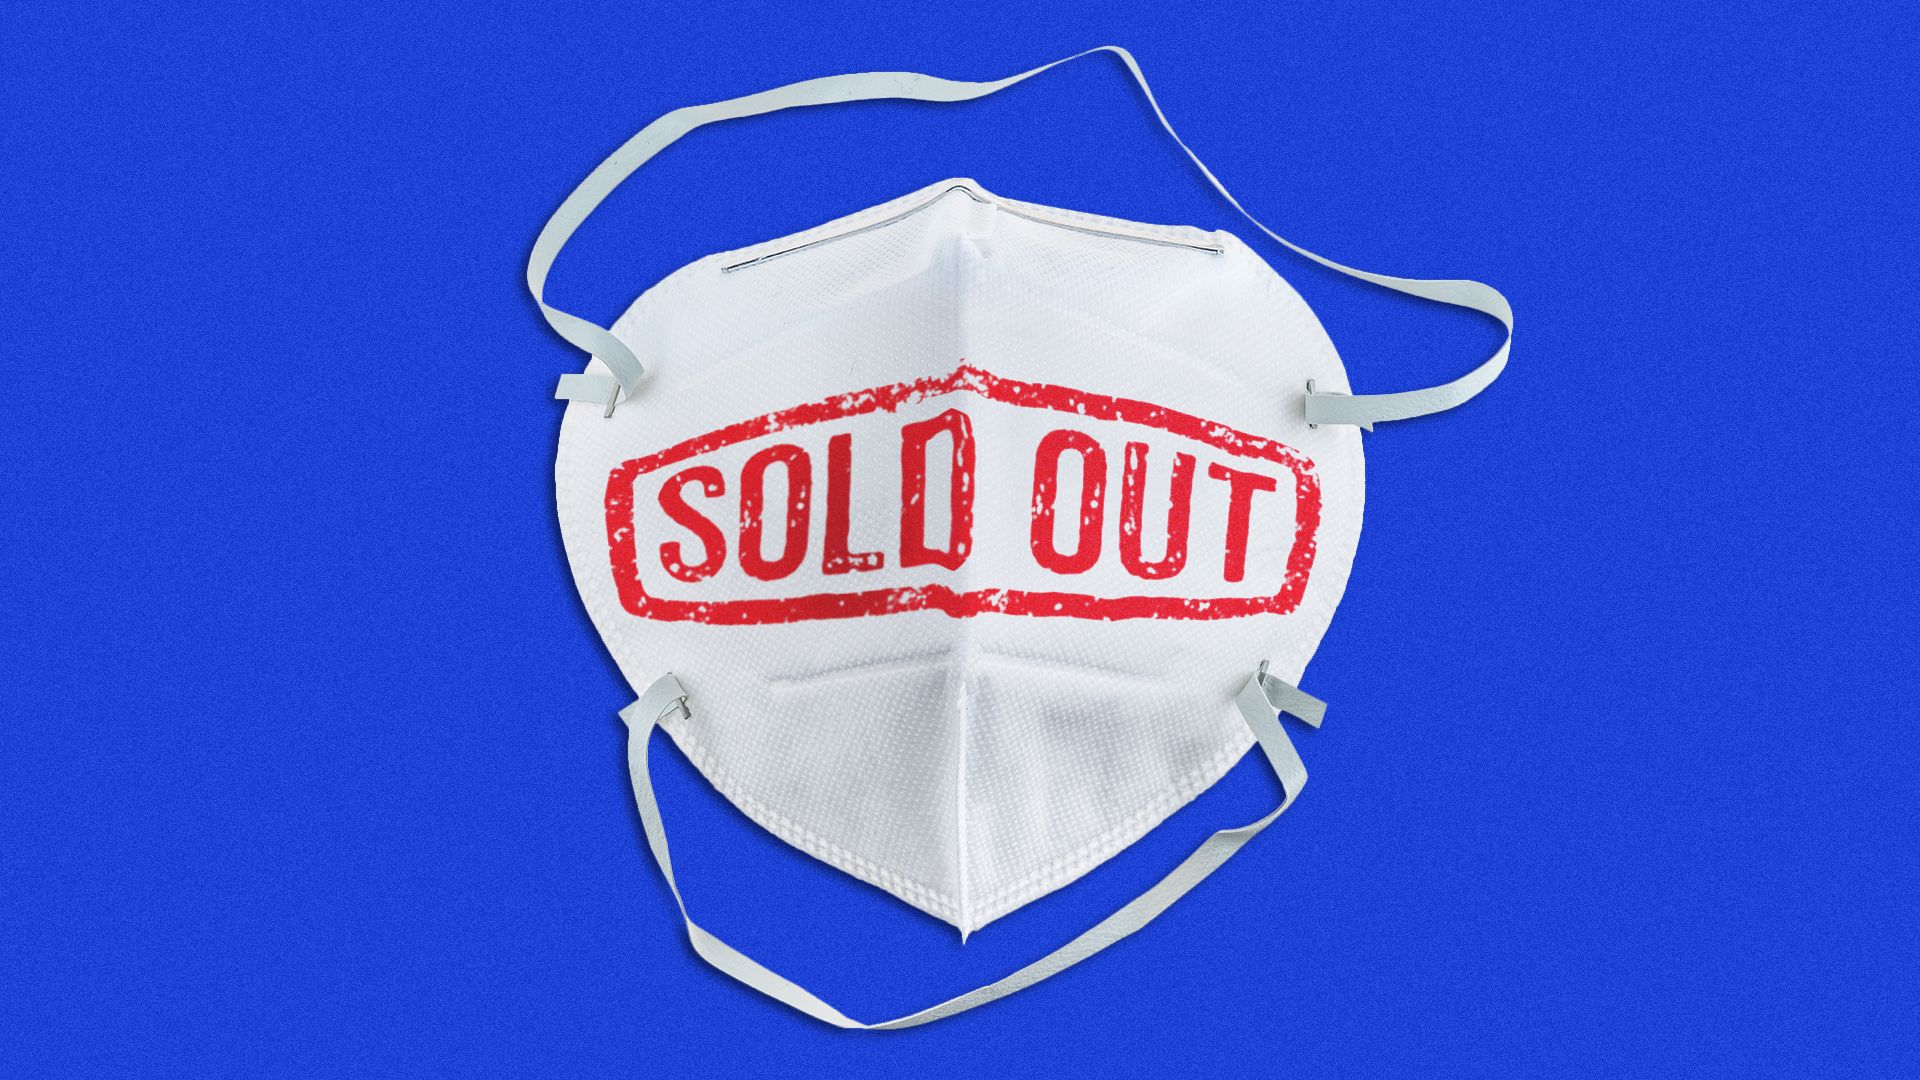 A white mask has the words "sold out" written in red on it against a blue background.